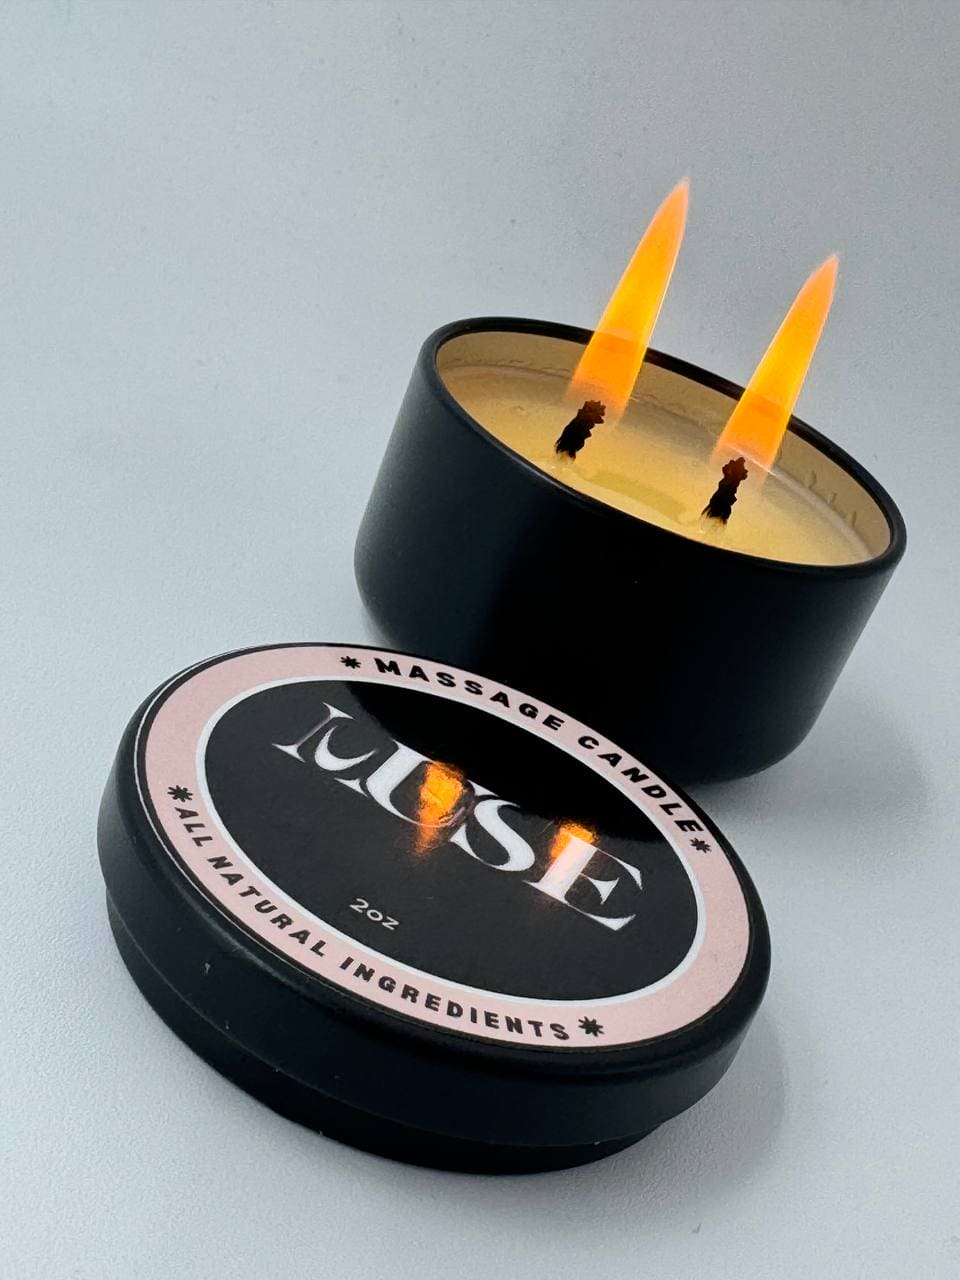  The image shows a lit MUSE massage candle with two bright flames, in a black container with the lid off to the side, highlighting the brand's focus on all-natural ingredients.